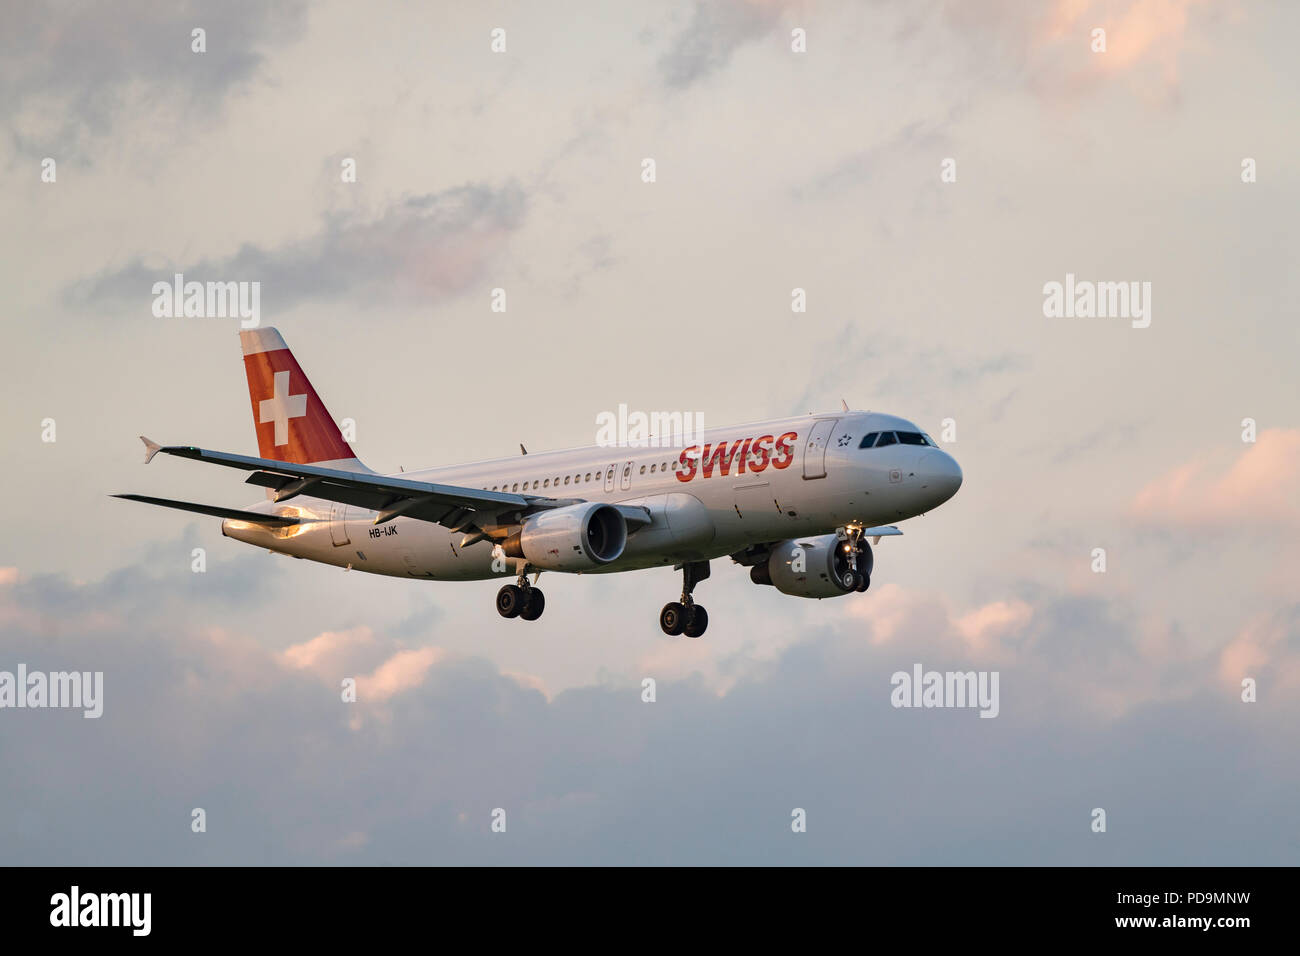 Airbus A320-214 of the Swiss Airline during landing approach, cloud sky, Switzerland Stock Photo